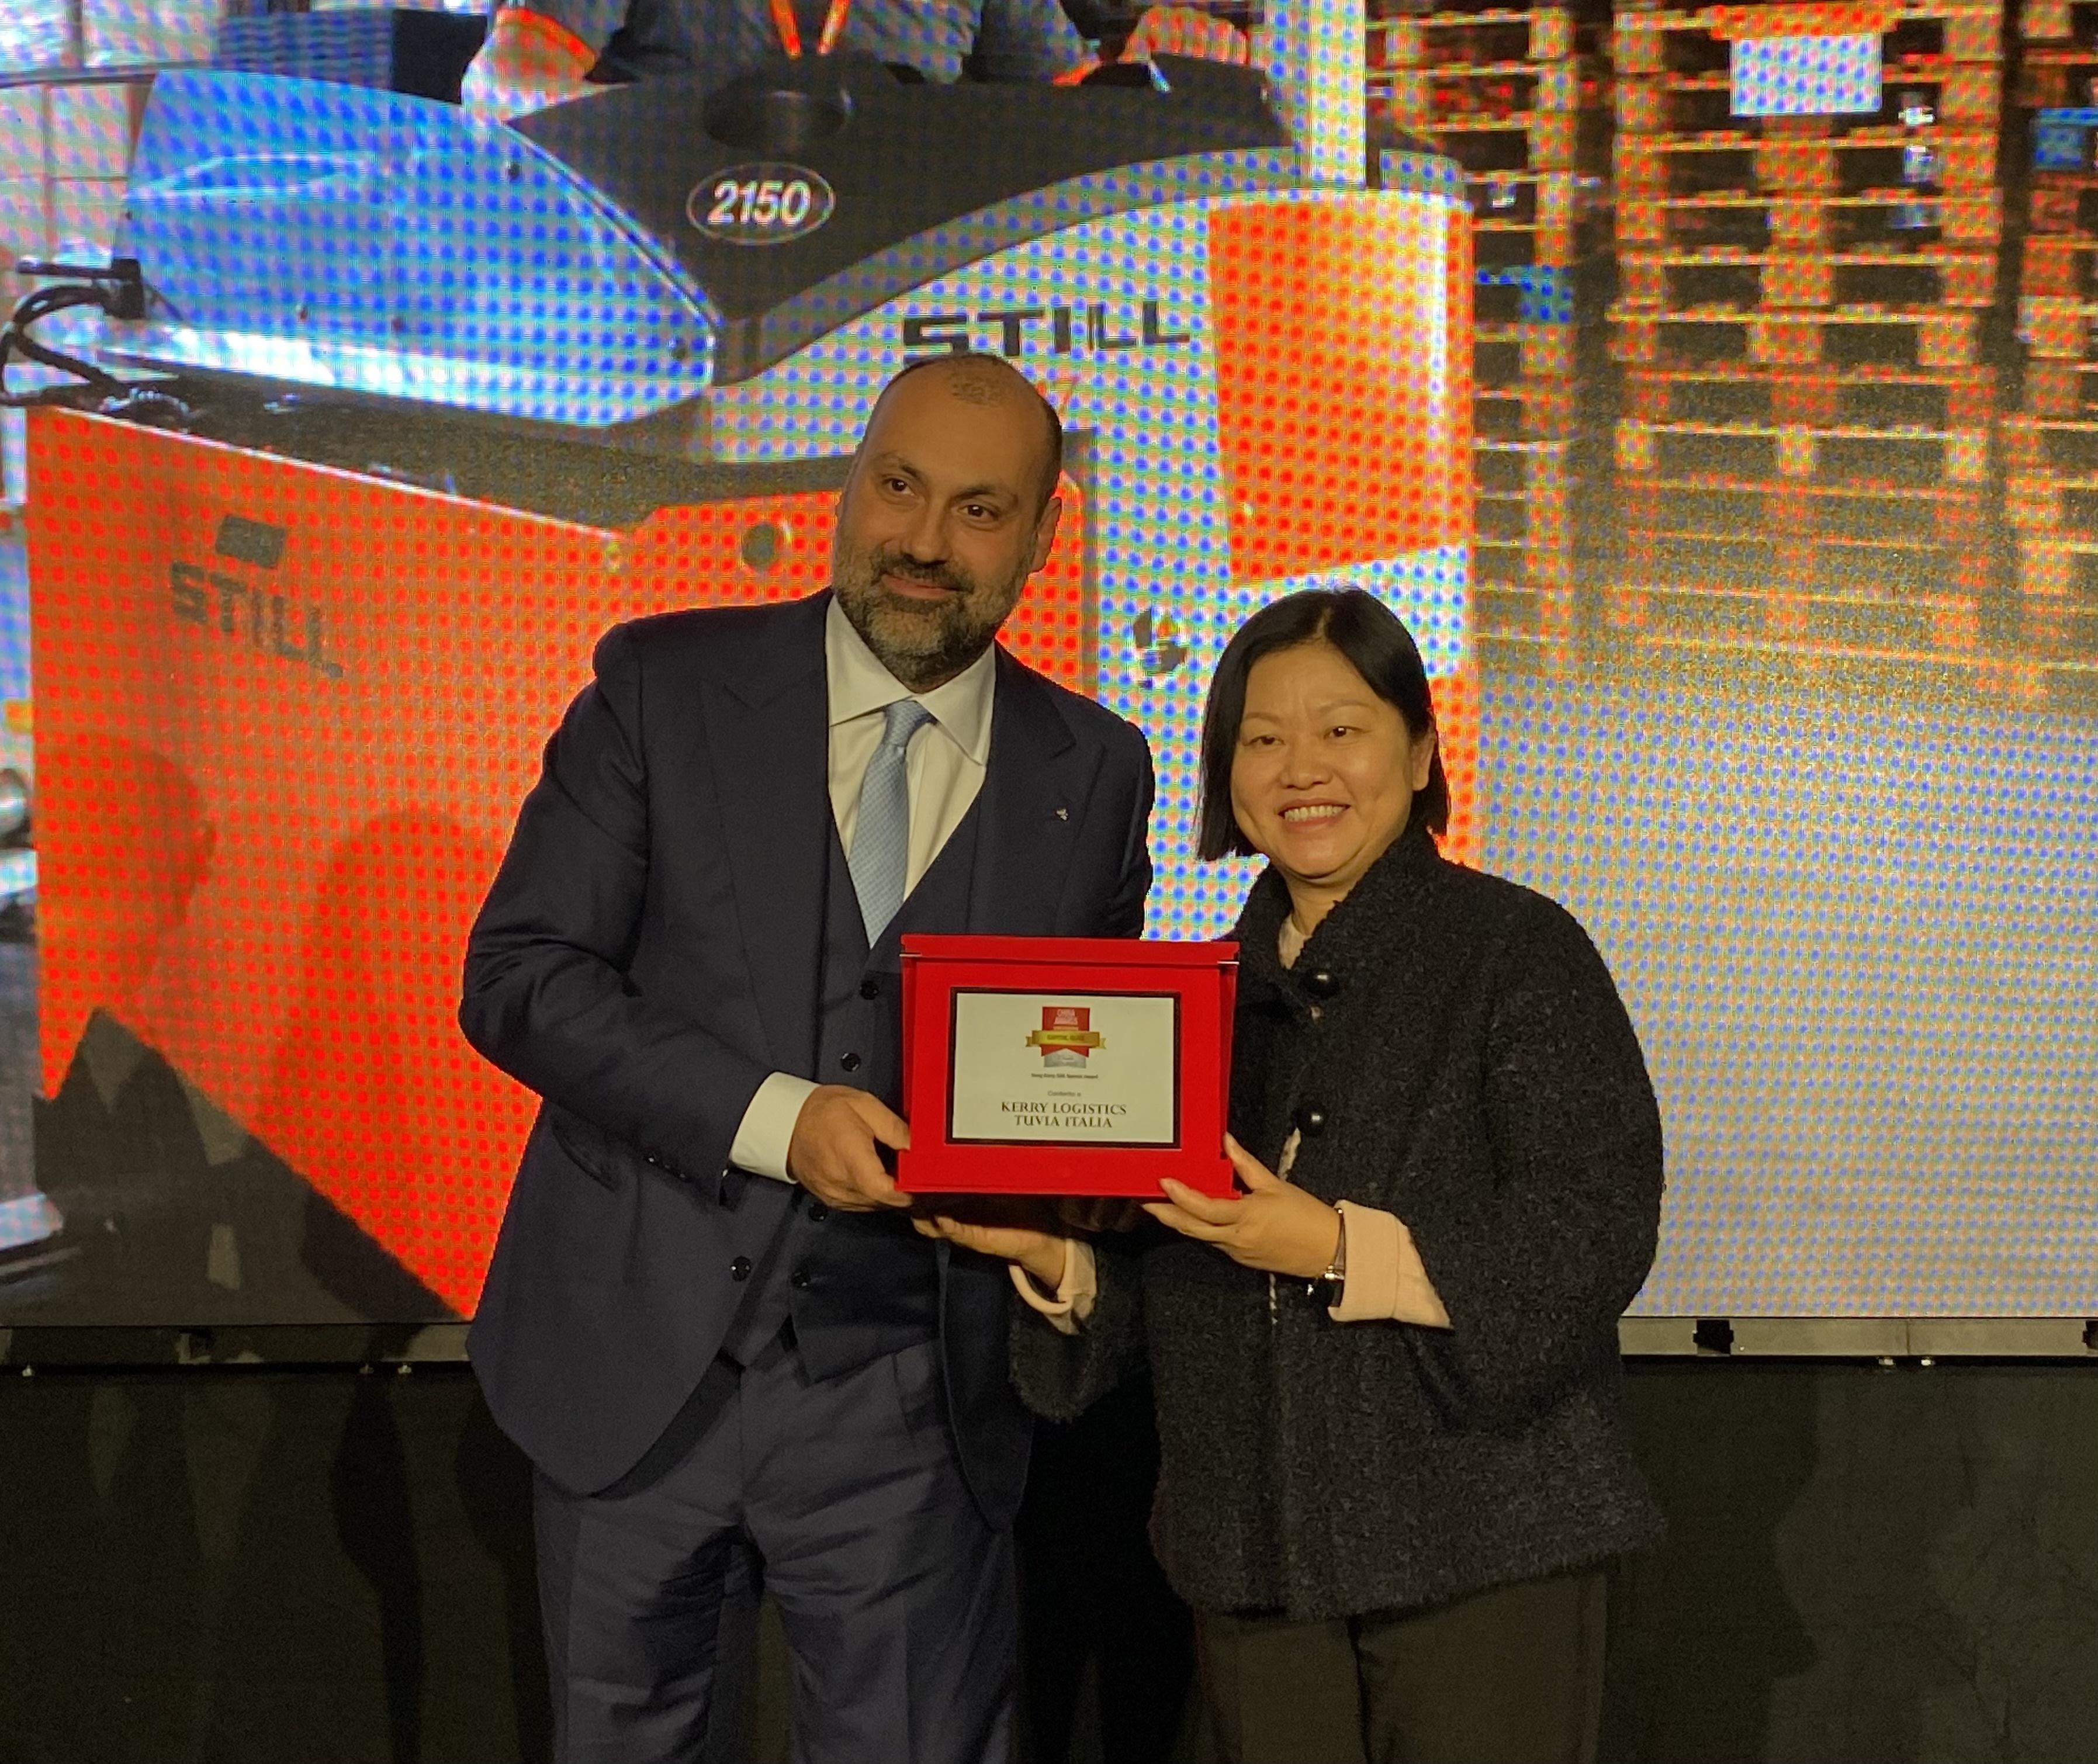 The Special Representative for Hong Kong Economic and Trade Affairs to the European Union, Ms Shirley Yung, presented the Special Hong Kong Award to Director - Chief Logistics Officer, Kerry Logistics - Tuvia Italia, Mr Stefano Poliani at the 18th China Awards in Milan, Italy on December 13 (Milan time).